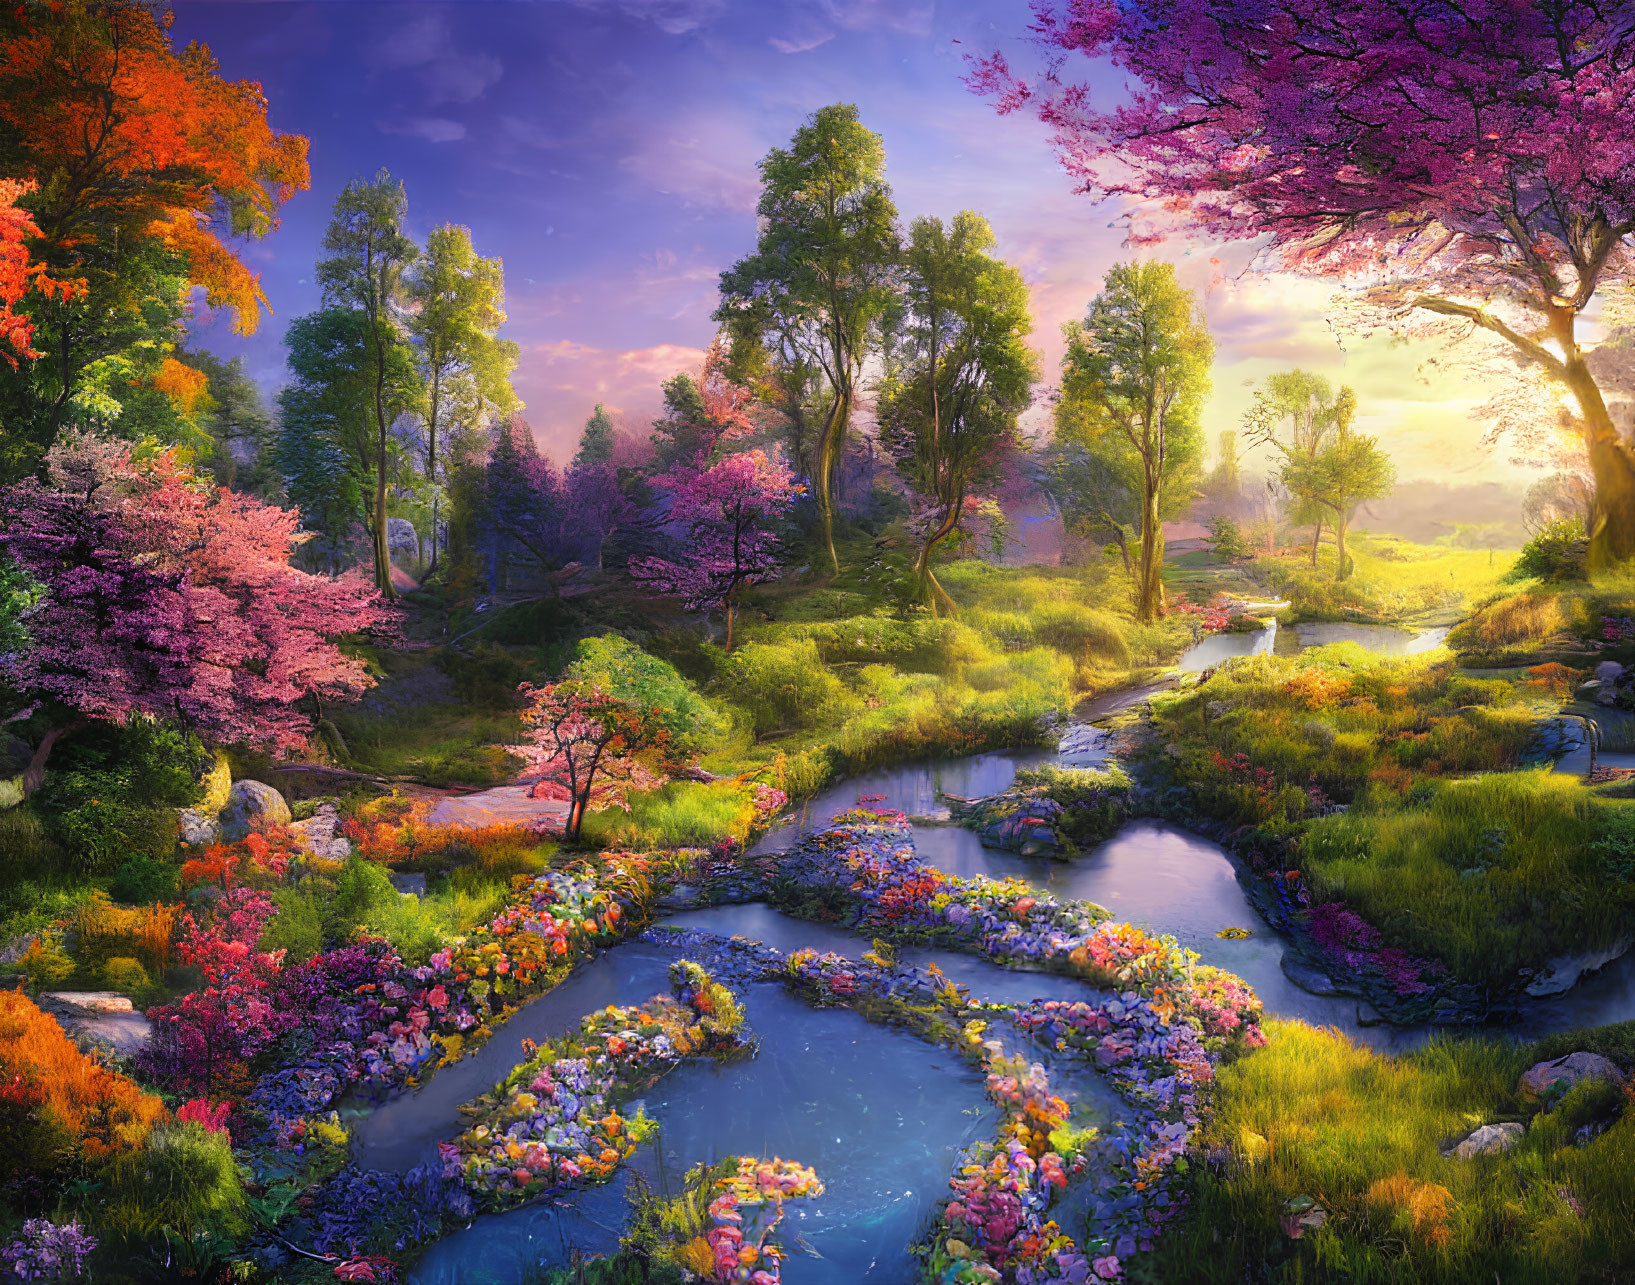 Colorful Fantasy Landscape with River, Trees, and Cherry Blossoms